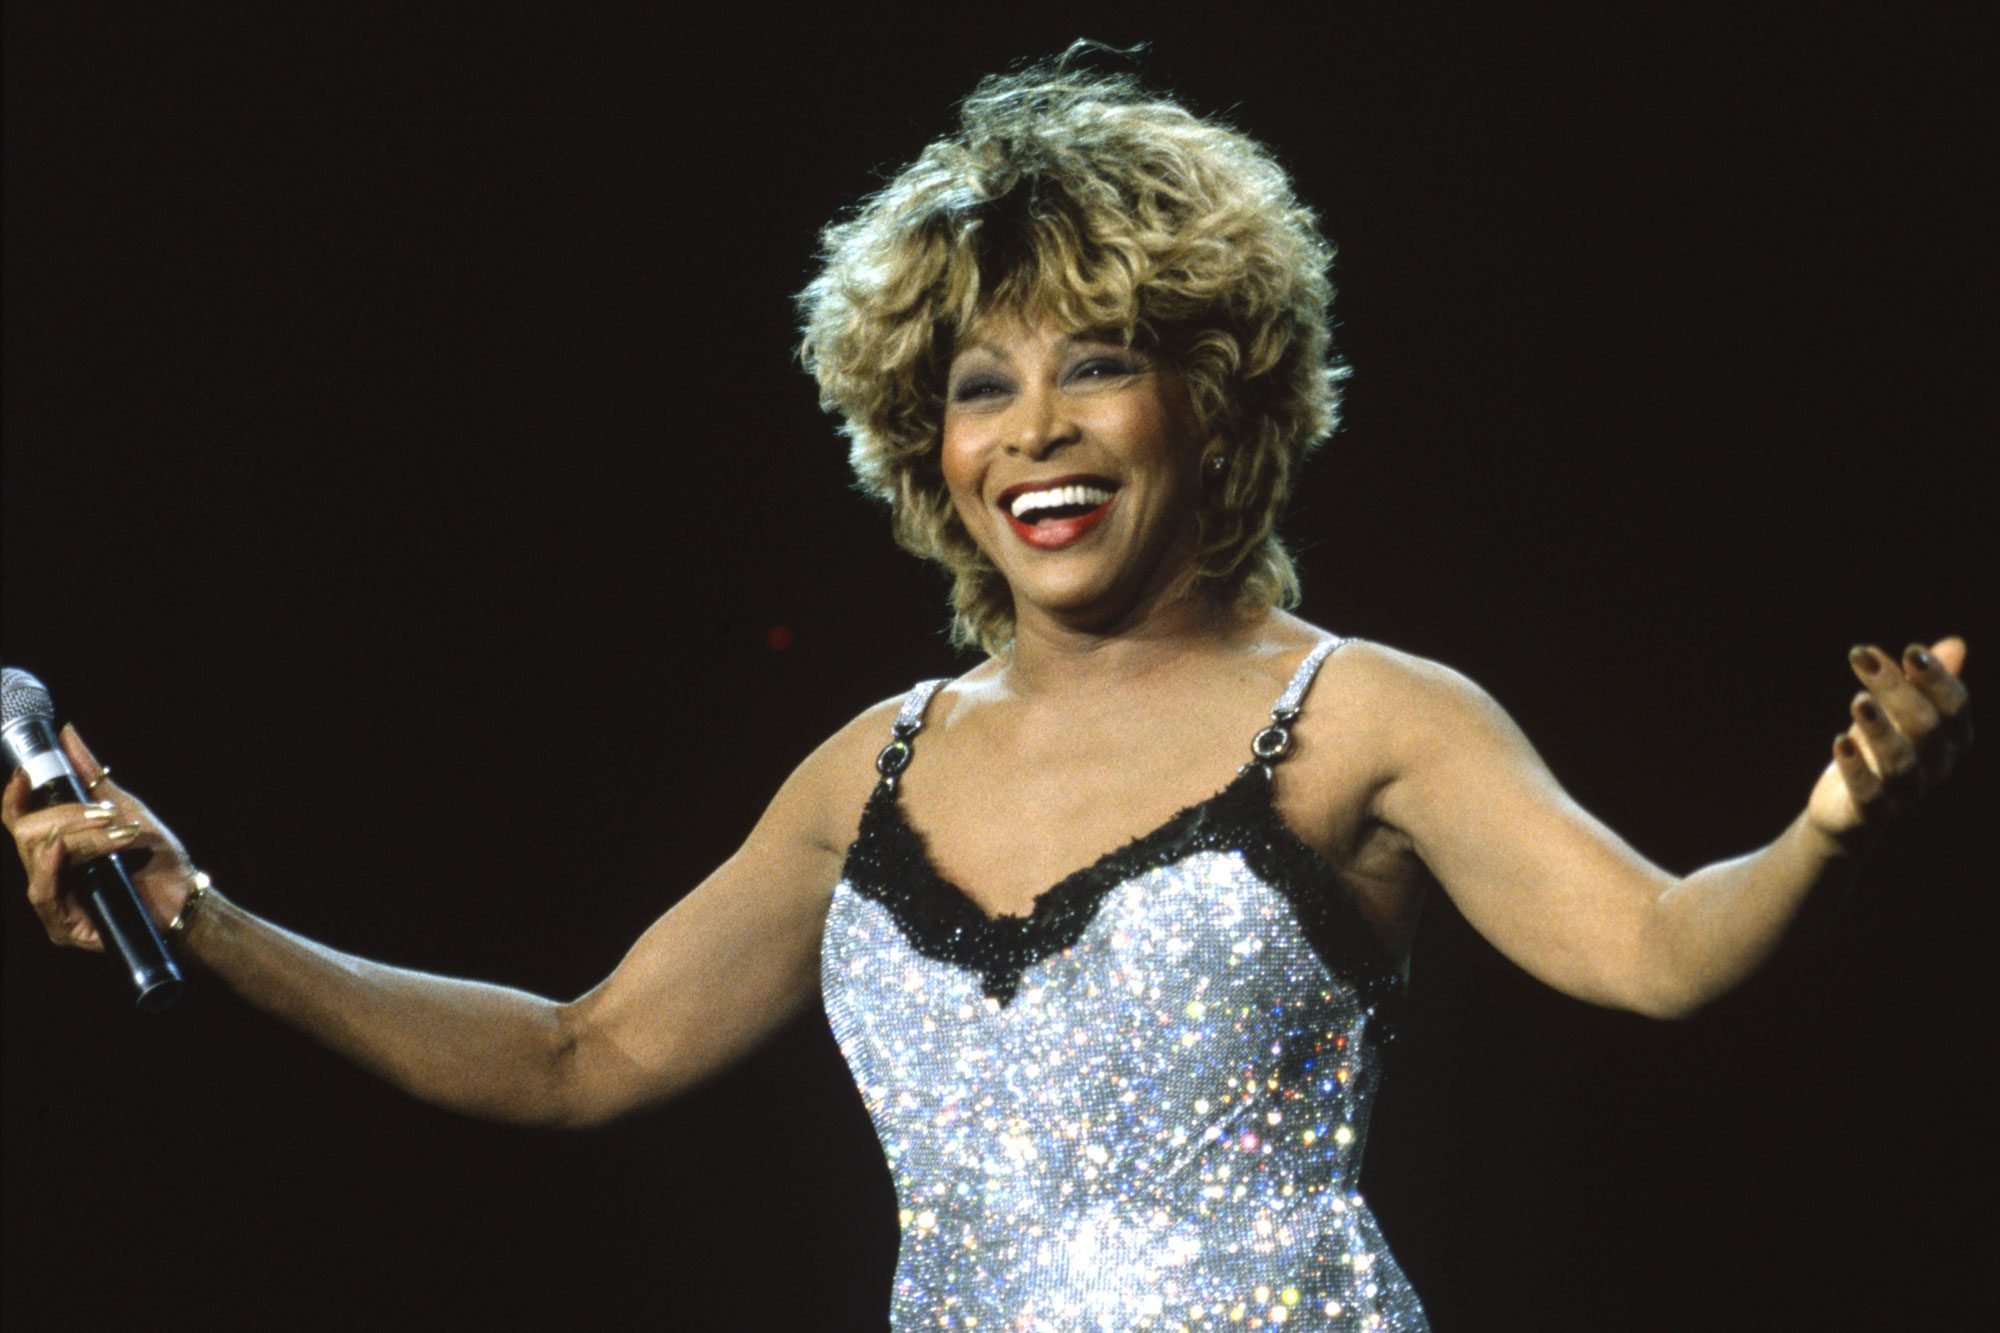 Tina Turner's 12 Daily Habits That Helped Her Live 83 Inspired Years